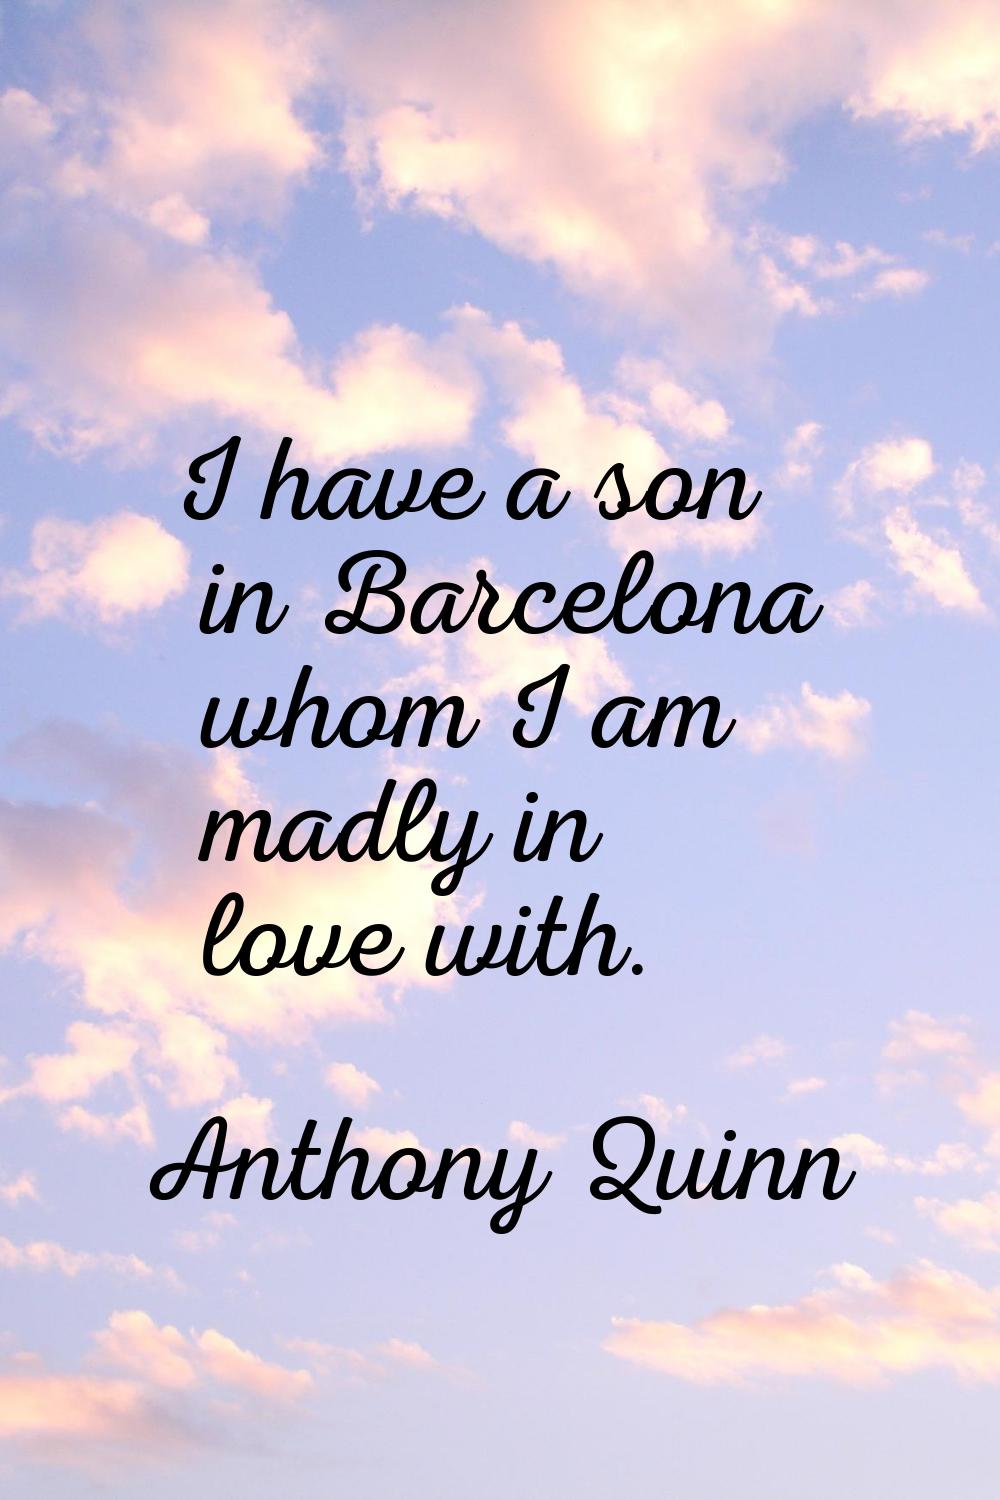 I have a son in Barcelona whom I am madly in love with.